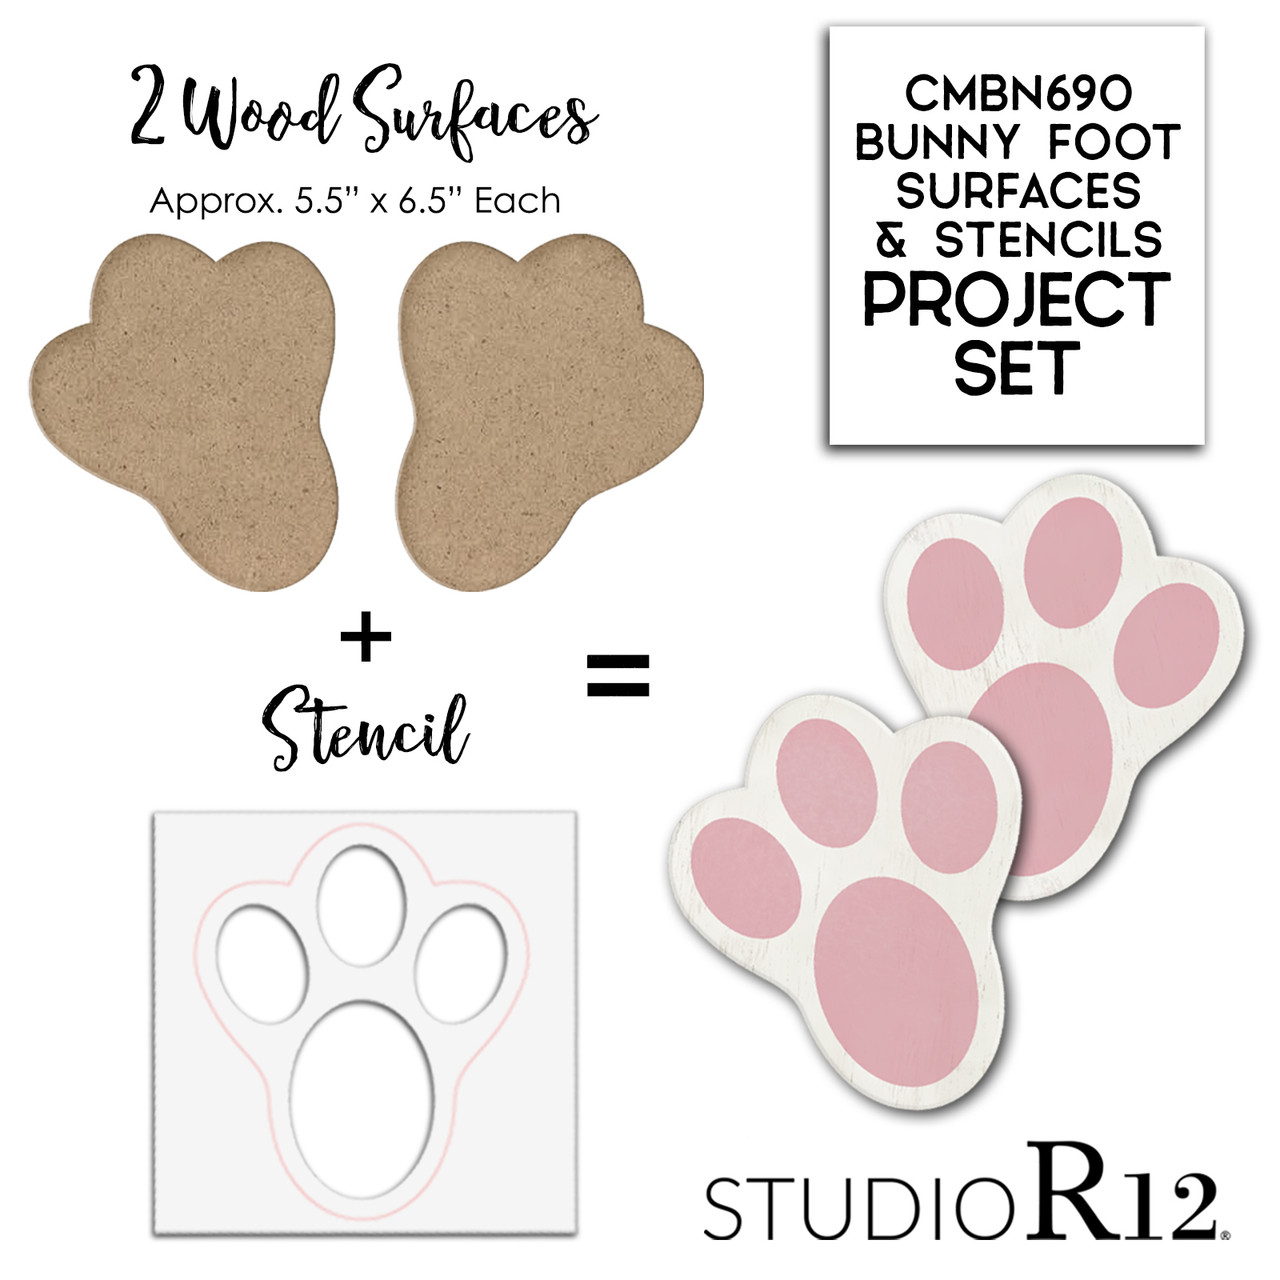 Bunny Paw Prints Surface & Stencil Set | Easter Bunny Rabbit Footprint Embellishment Set | Craft and Paint Spring Home Decor | CMBN690